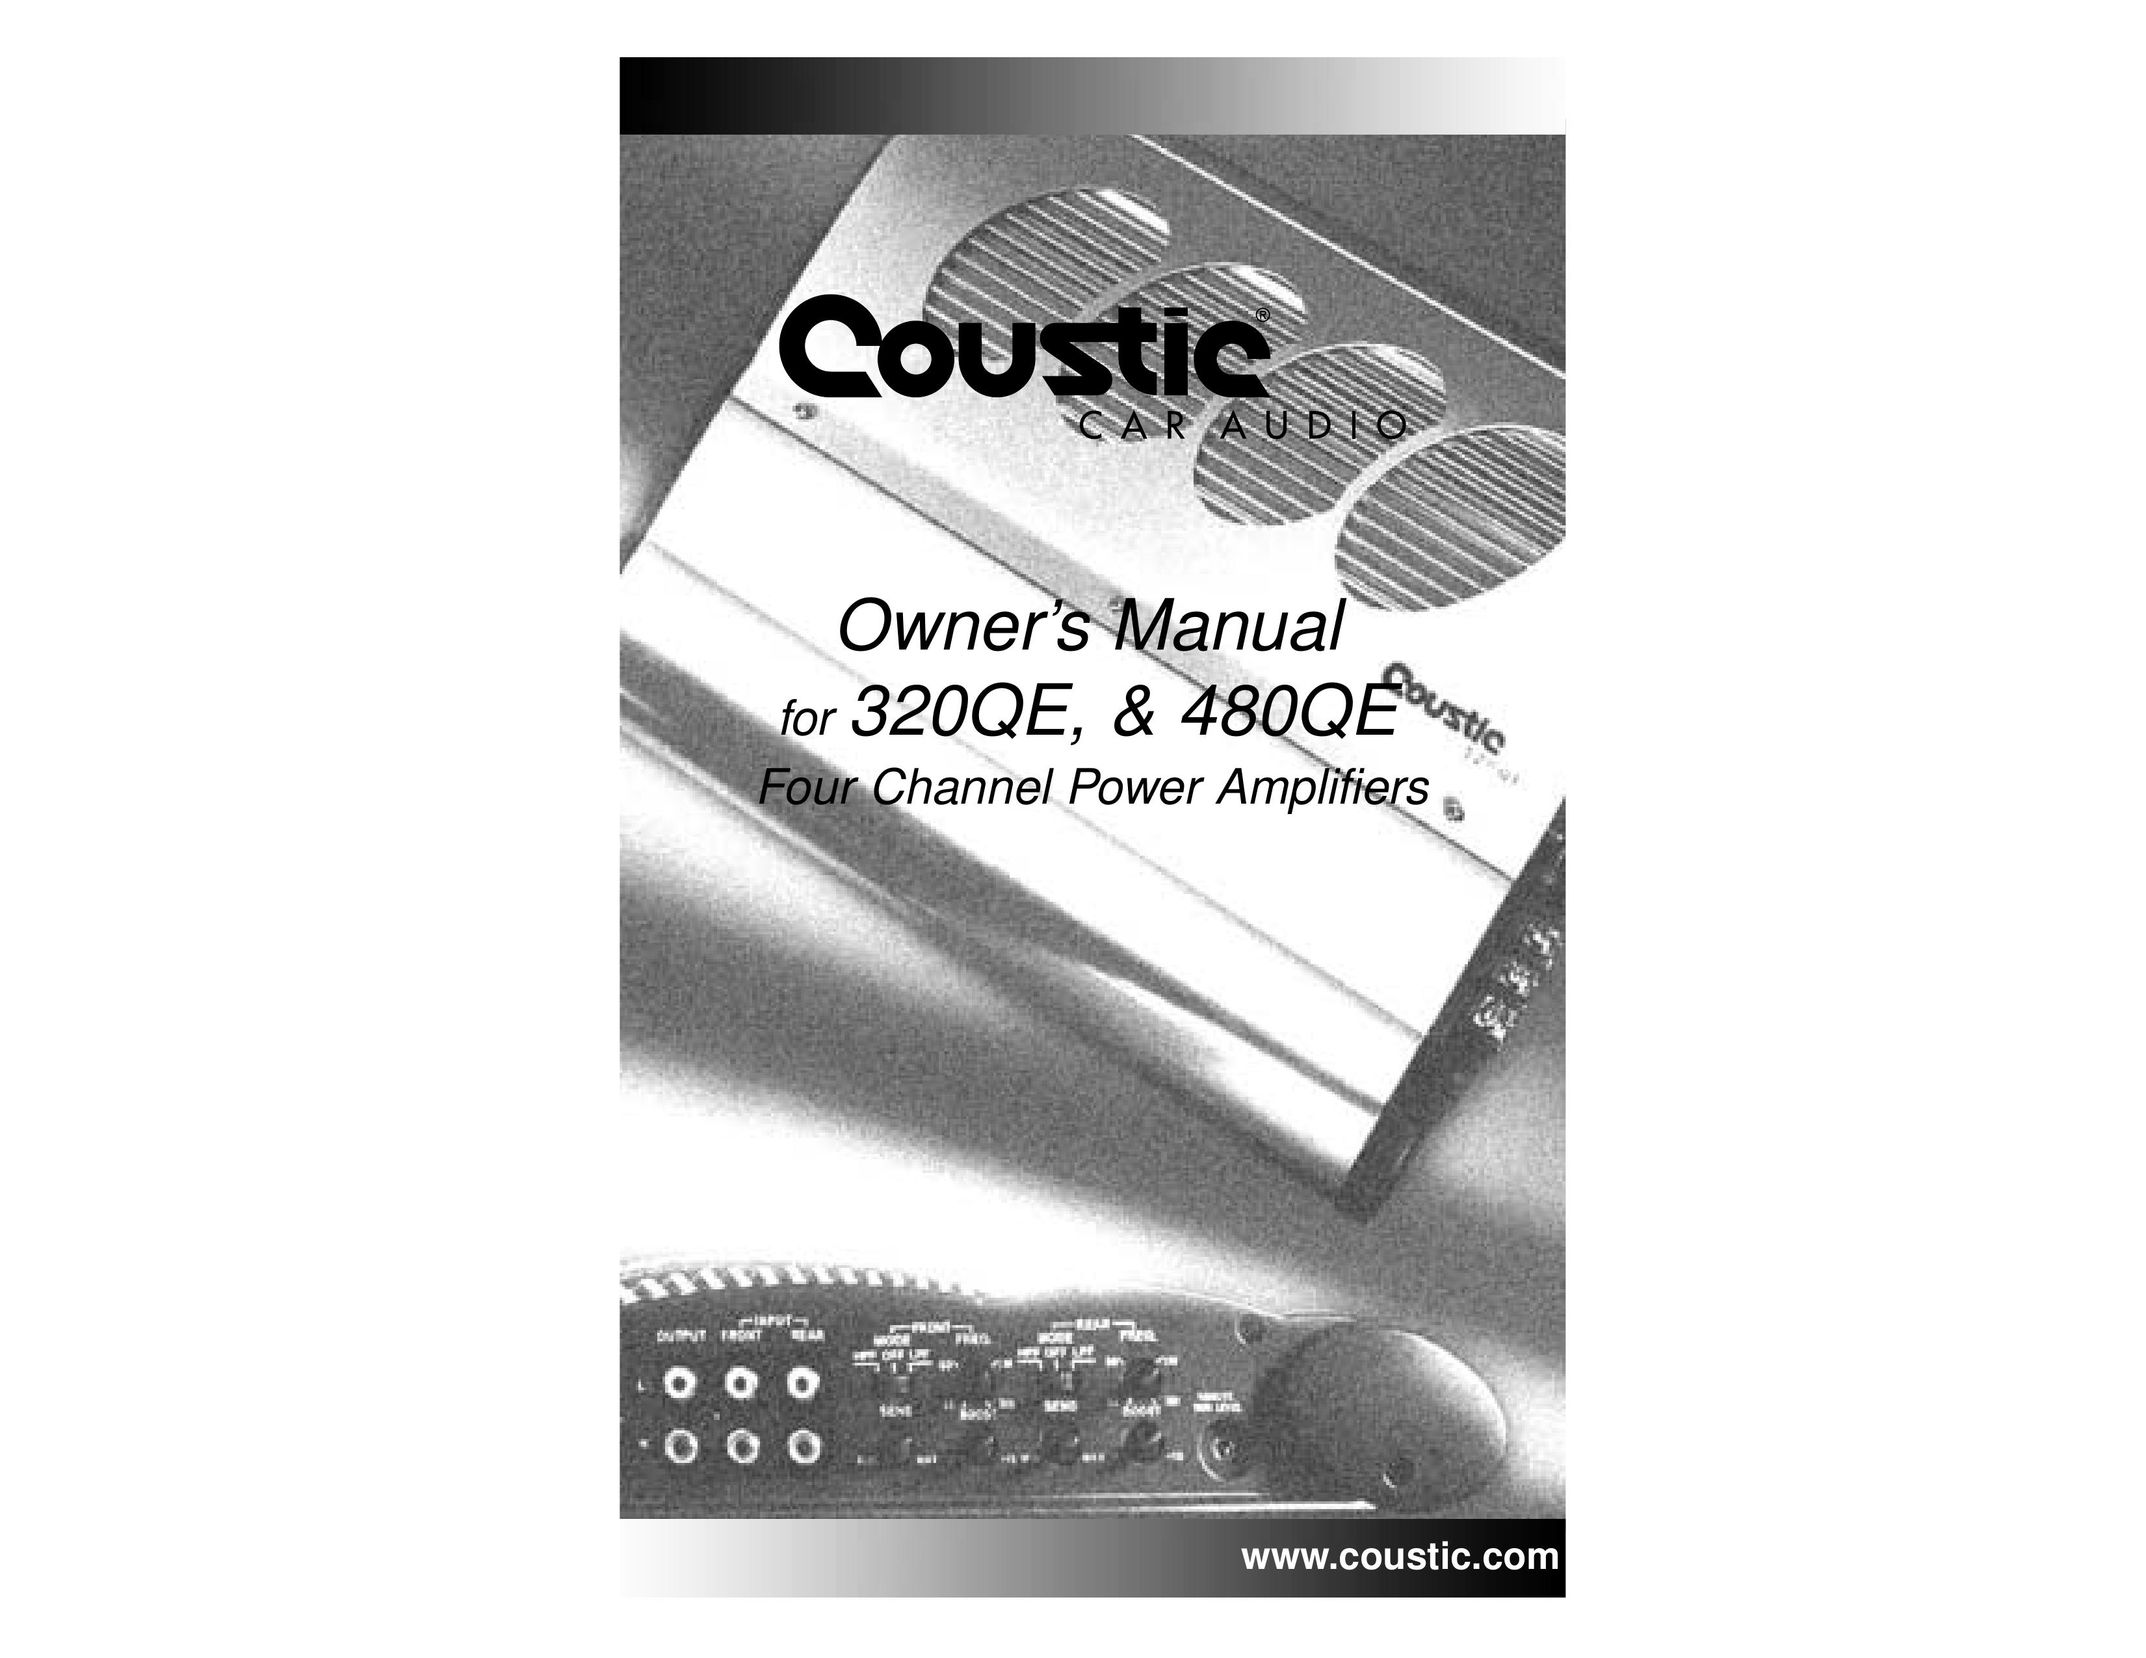 Coustic 320QE Stereo Amplifier User Manual